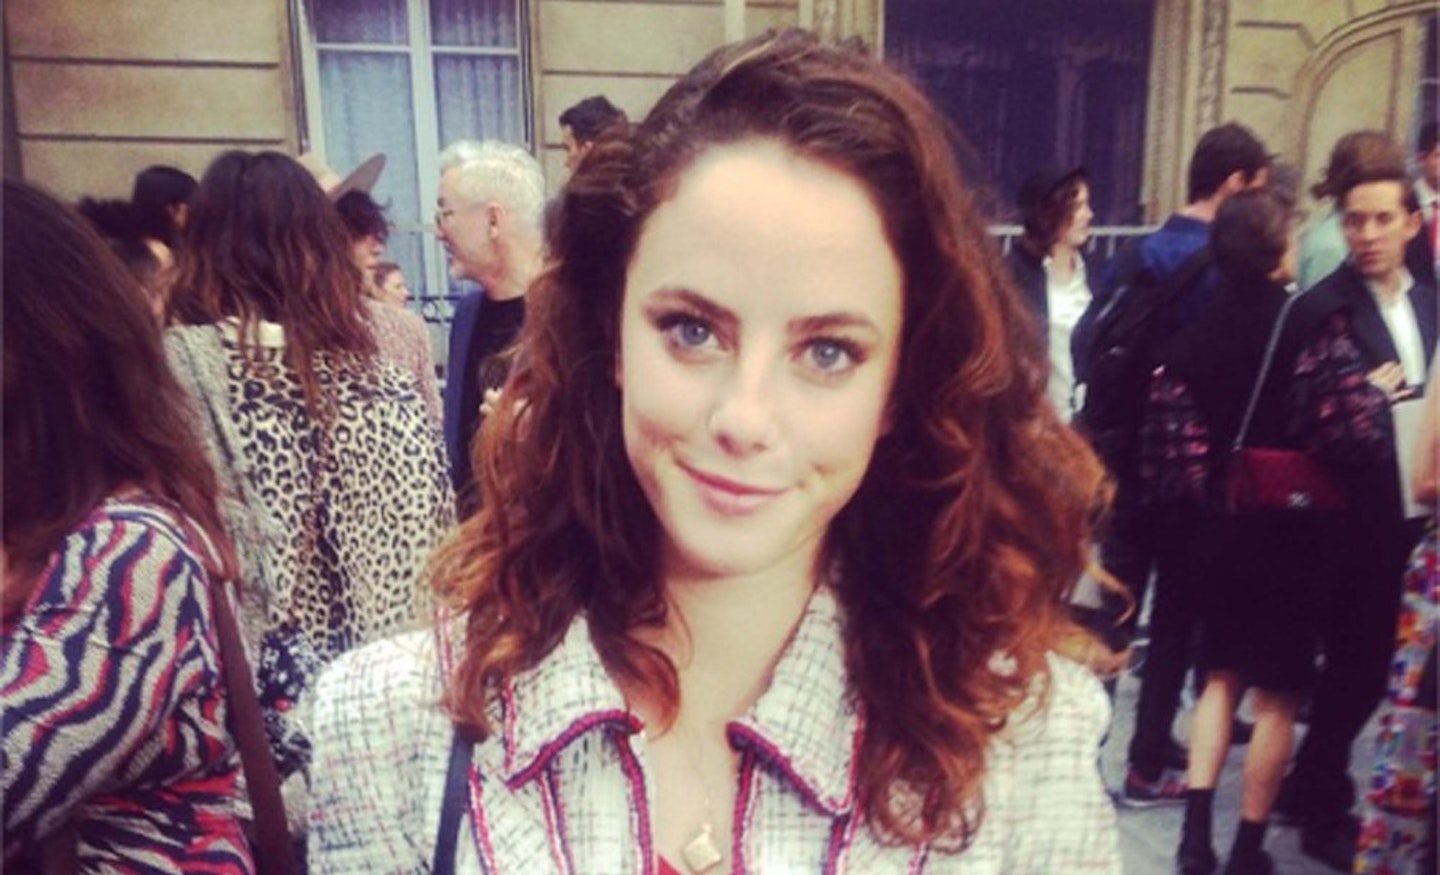 @Grazia_Live: Actress Kaya Scodelario tells us she'll be packing her Maze Runner promo wardrobe with Chanel garb. Smart move.